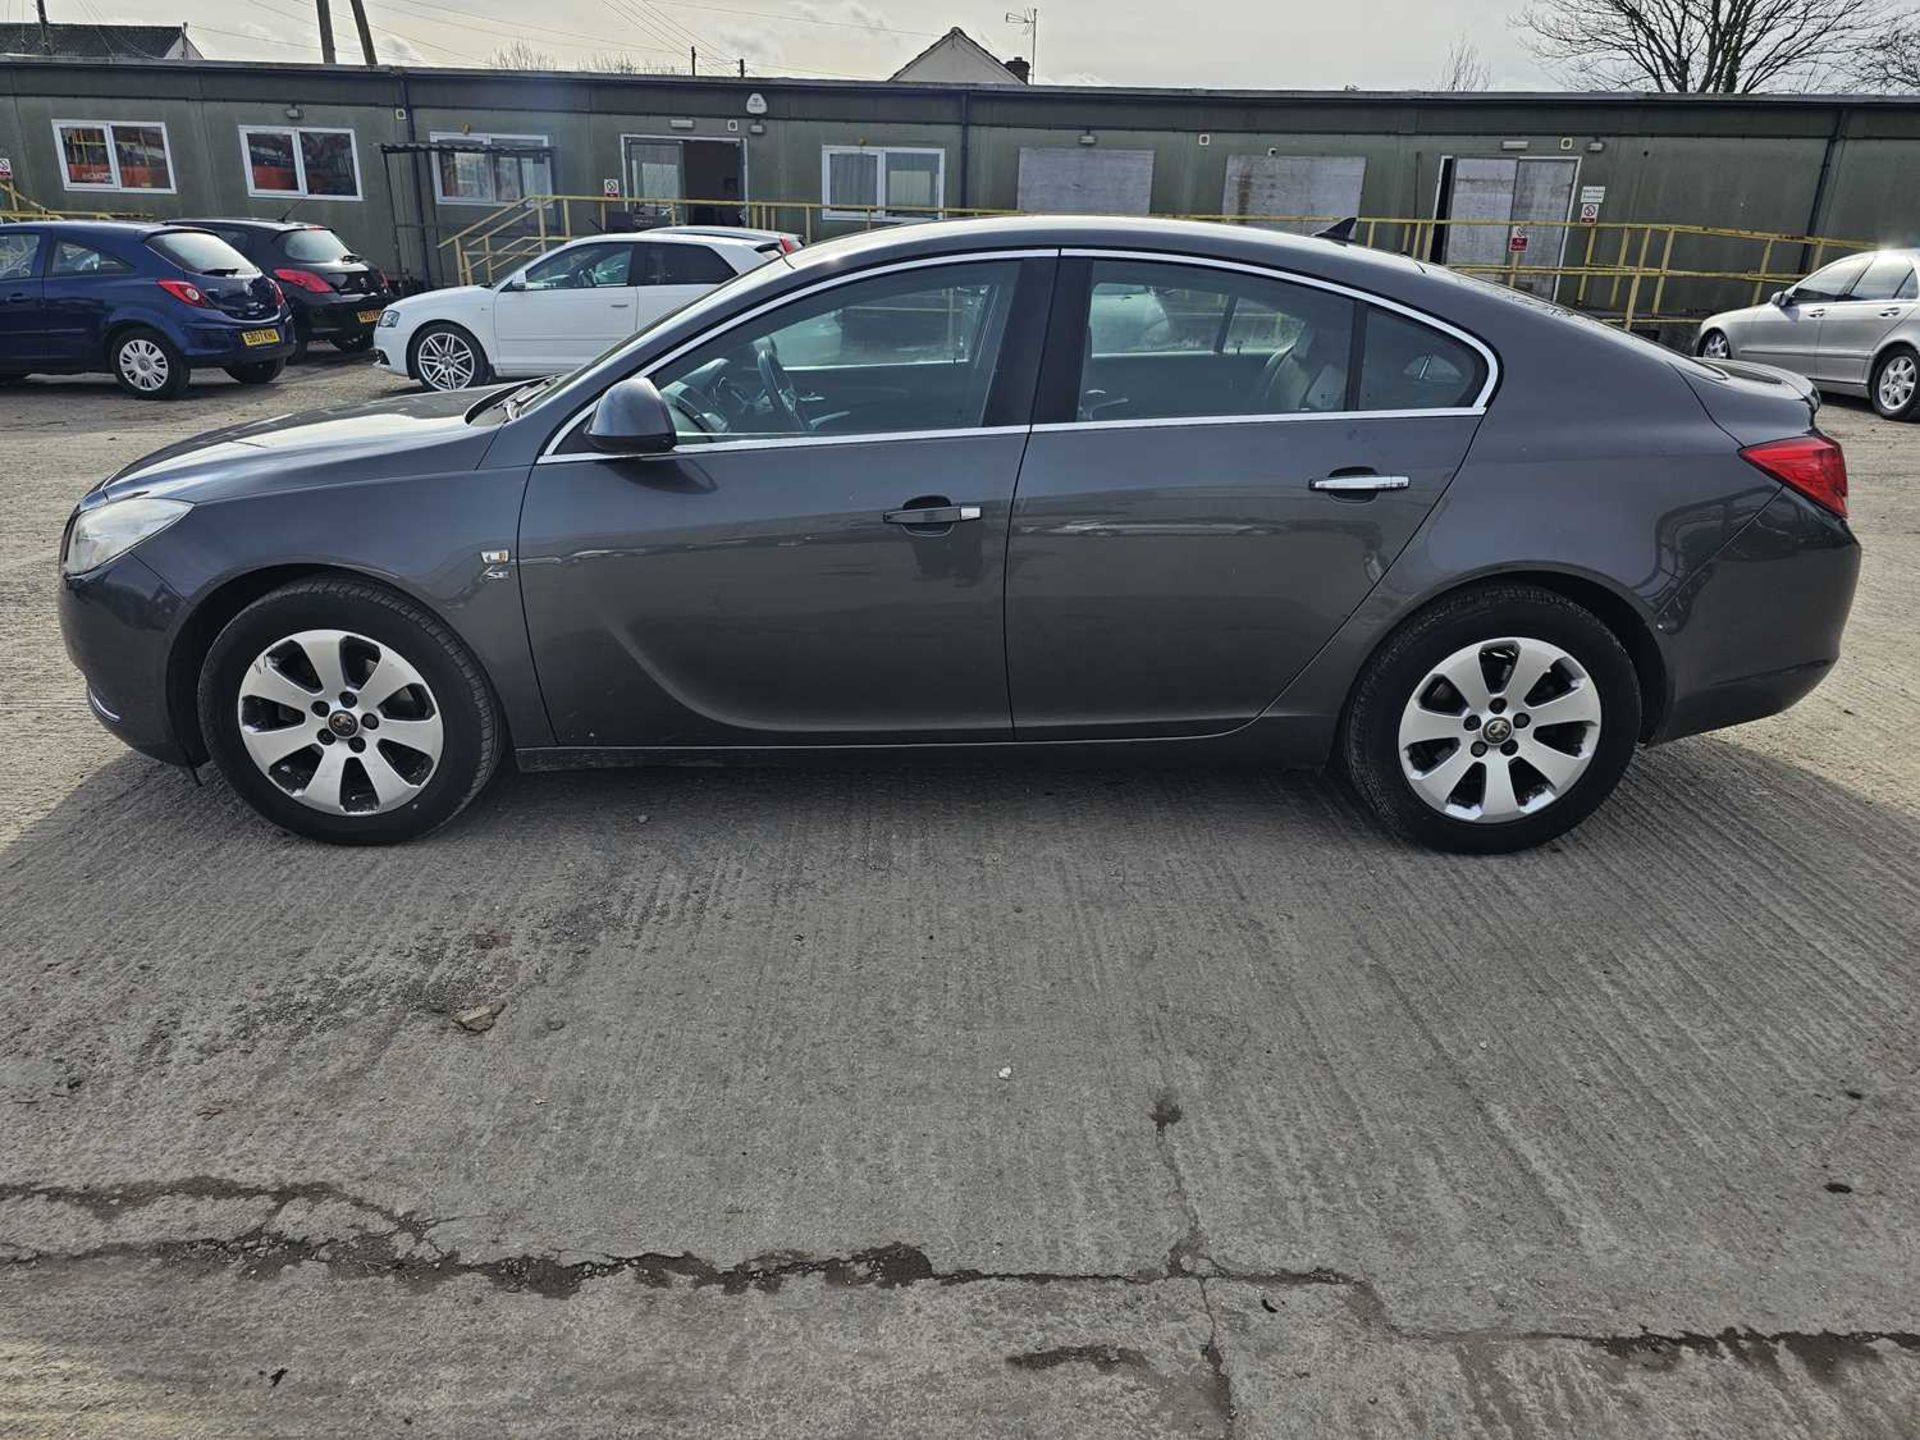 2009 Vauxhall Insignia, 6 Speed, Bluetooth, Cruise Control, Climate Control (Reg. Docs. Available, T - Image 2 of 28